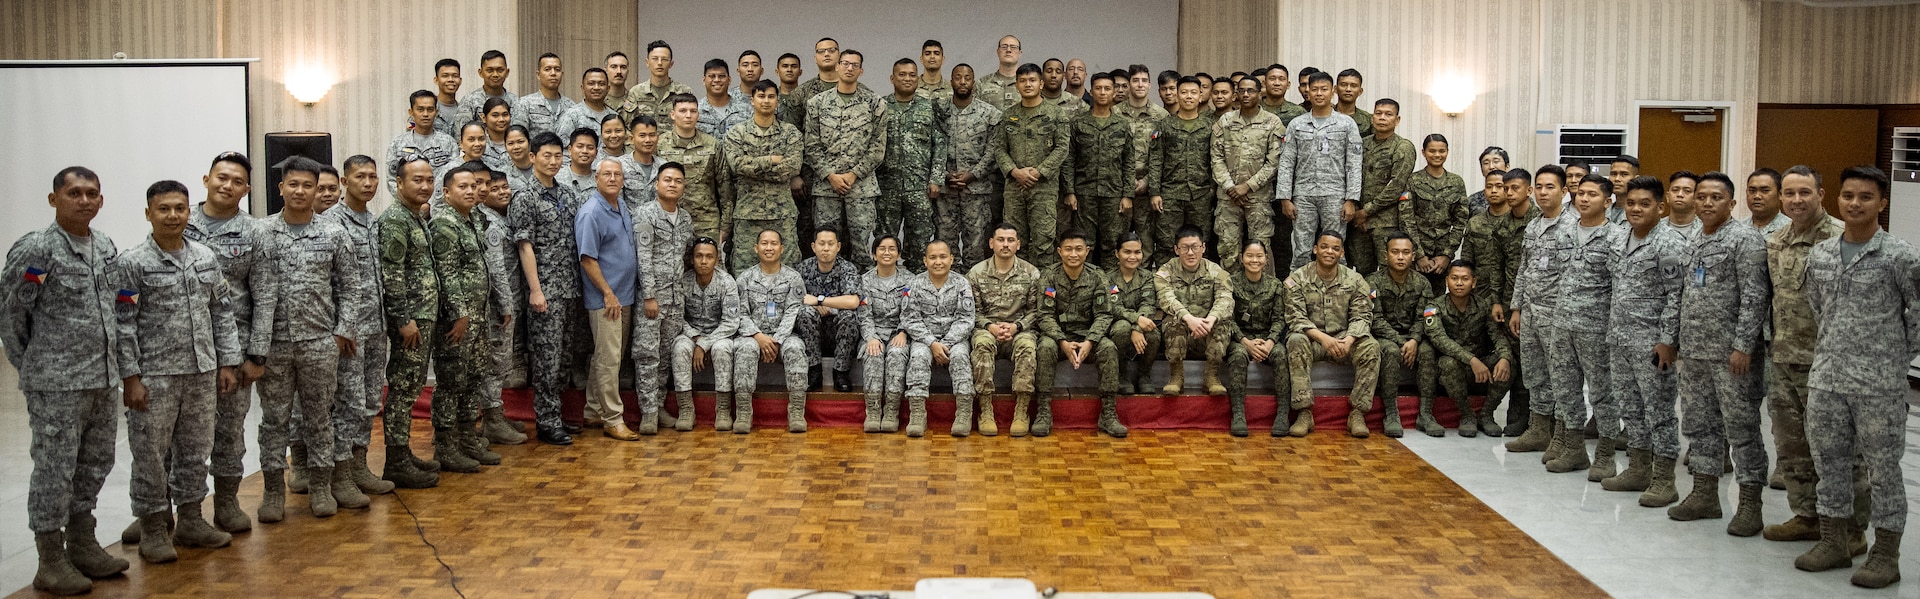 Service members from the U.S. Military, Armed Forces of the Philippines, and Japan Air Self-Defense Force pose for a photo after a week-long Joint Integrated Air And Missile Defense exchange during Exercise Balikatan 24 at Clark Air Base, Philippines, April 25, 2024. BK 24 is an annual exercise between the Armed Forces of the Philippines and the U.S. military designed to strengthen bilateral interoperability, capabilities, trust, and cooperation built over decades of shared experiences. (U.S. Army photo by Maj. Trevor Wild)